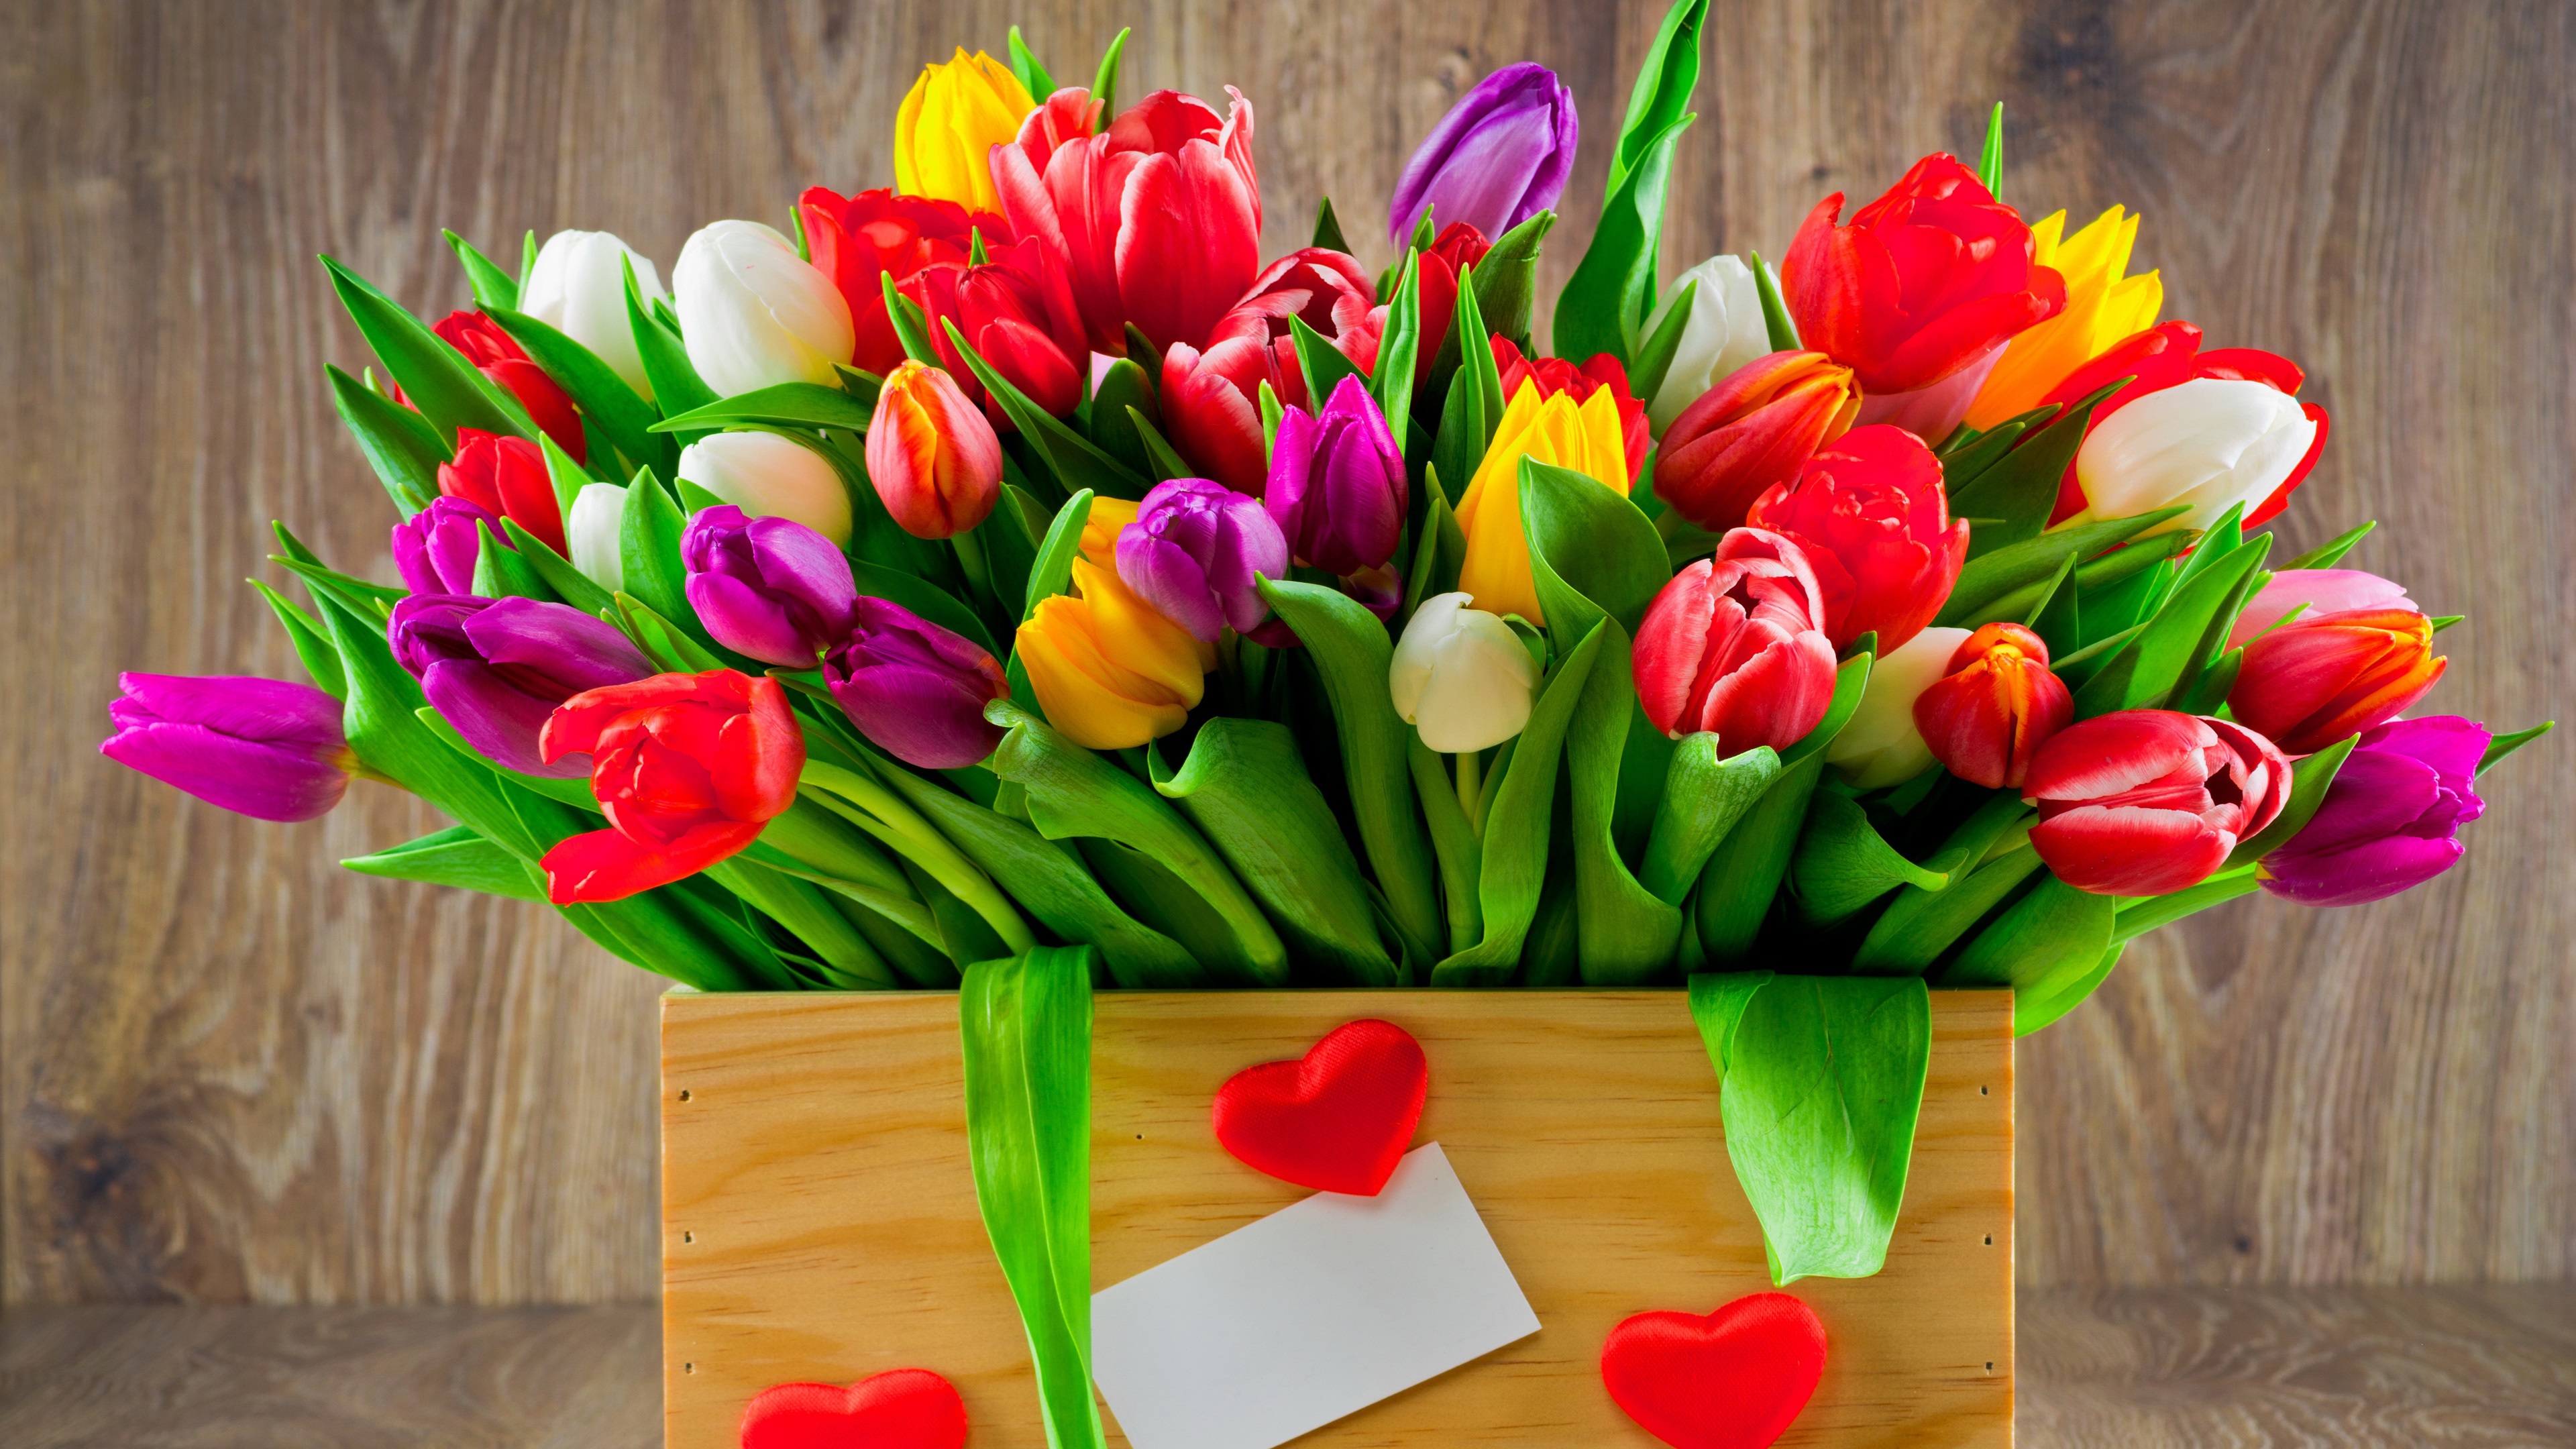 heart, man made, flower, box, colorful, colors, earth, purple flower, red flower, tulip, white flower, yellow flower